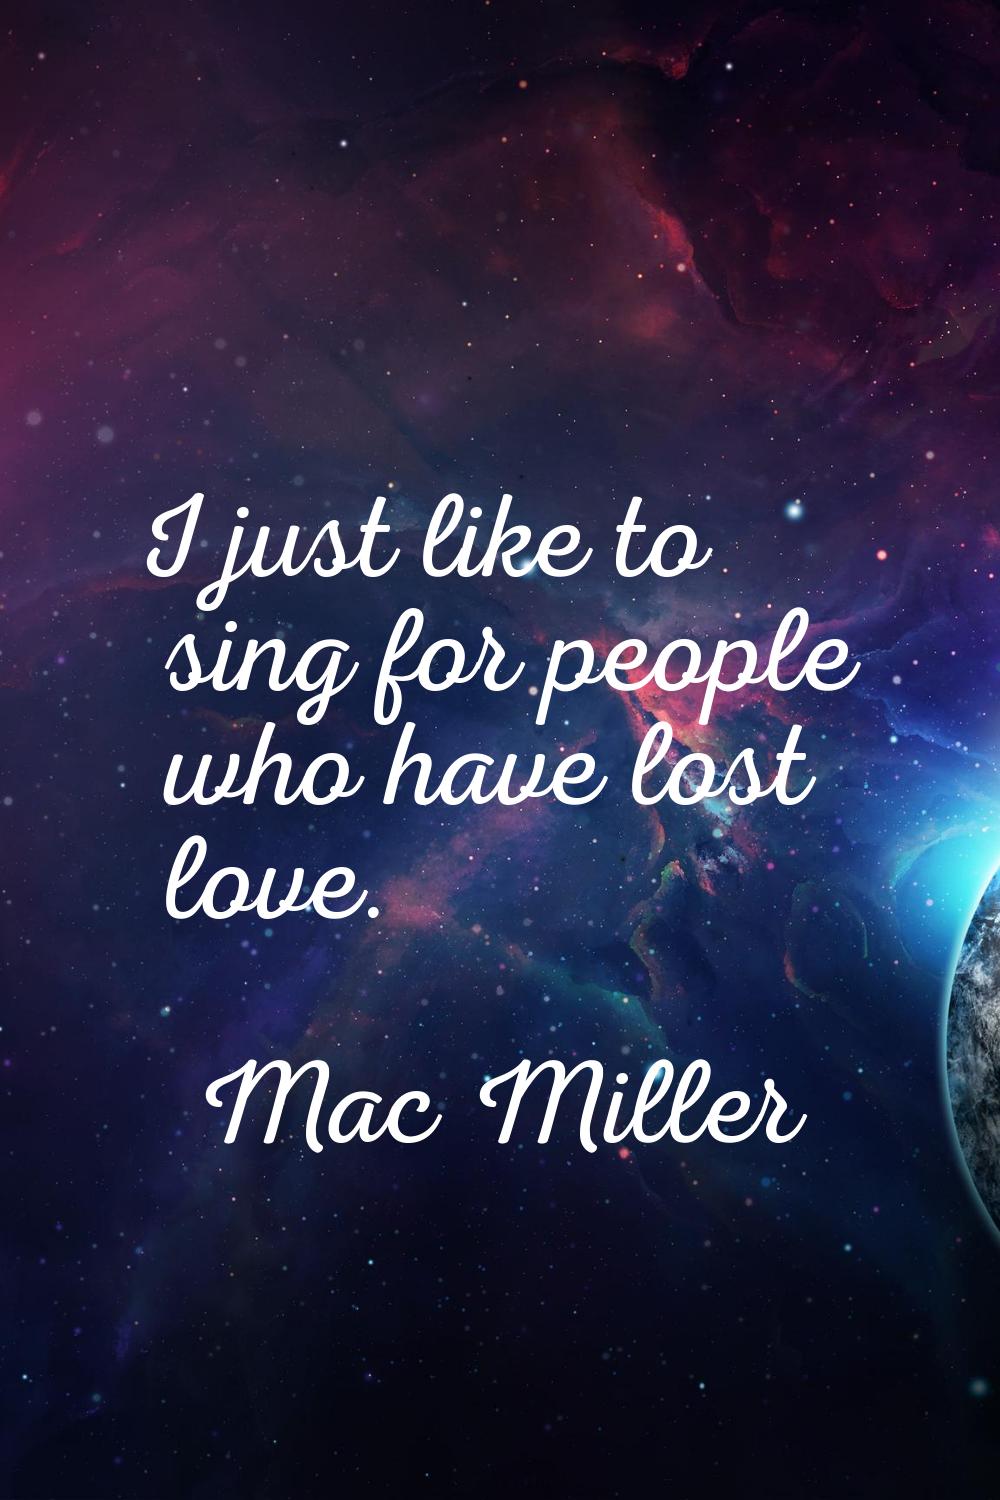 I just like to sing for people who have lost love.